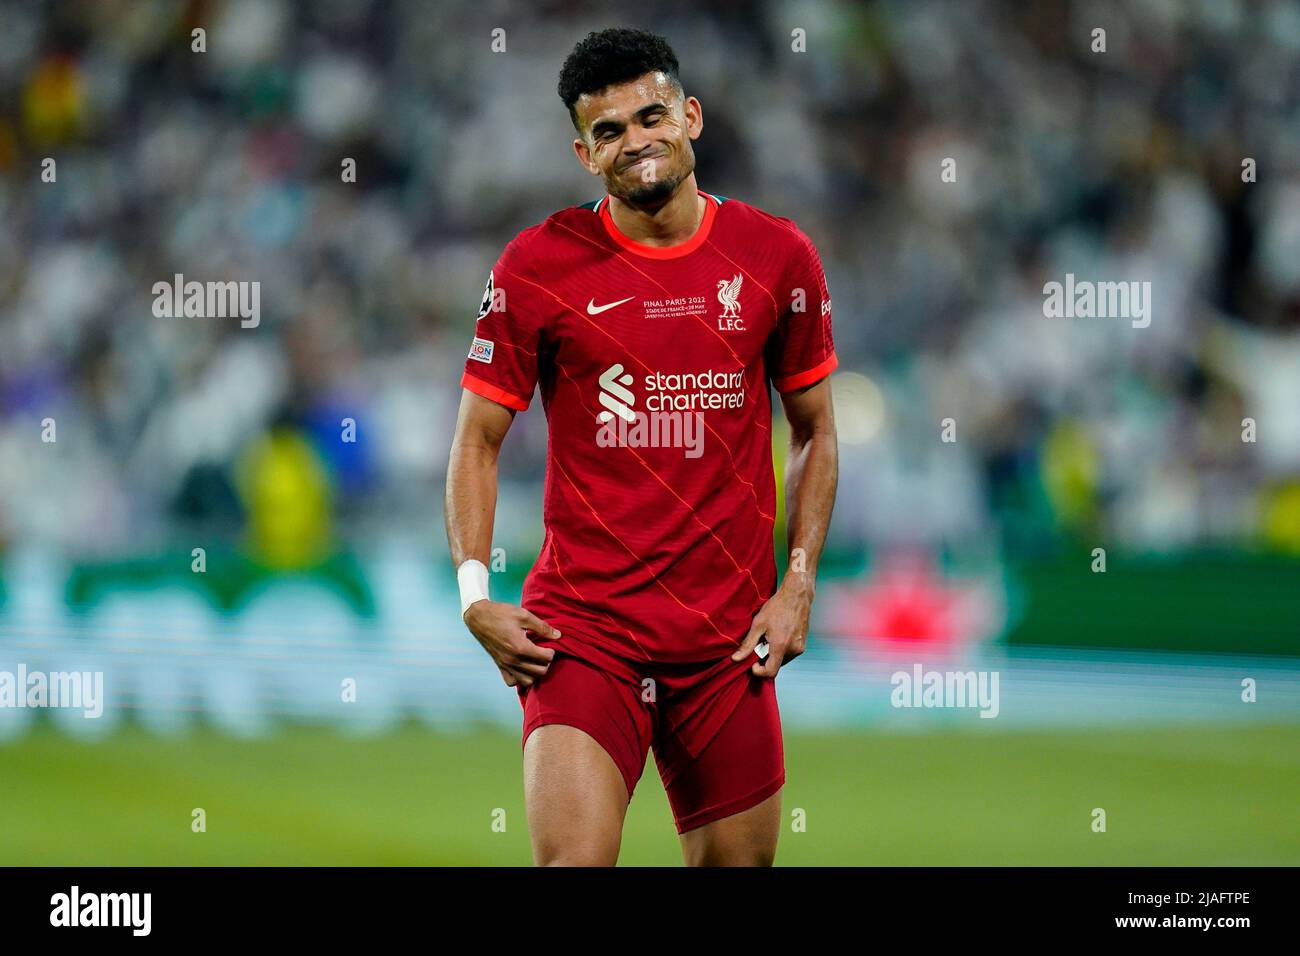 Luis Diaz of Liverpool FC during the UEFA Champions League Final match between Liverpool FC and Real Madrid played at Stade de France on May 28, 2022 in Paris, France. (Photo / Magma) Stock Photo